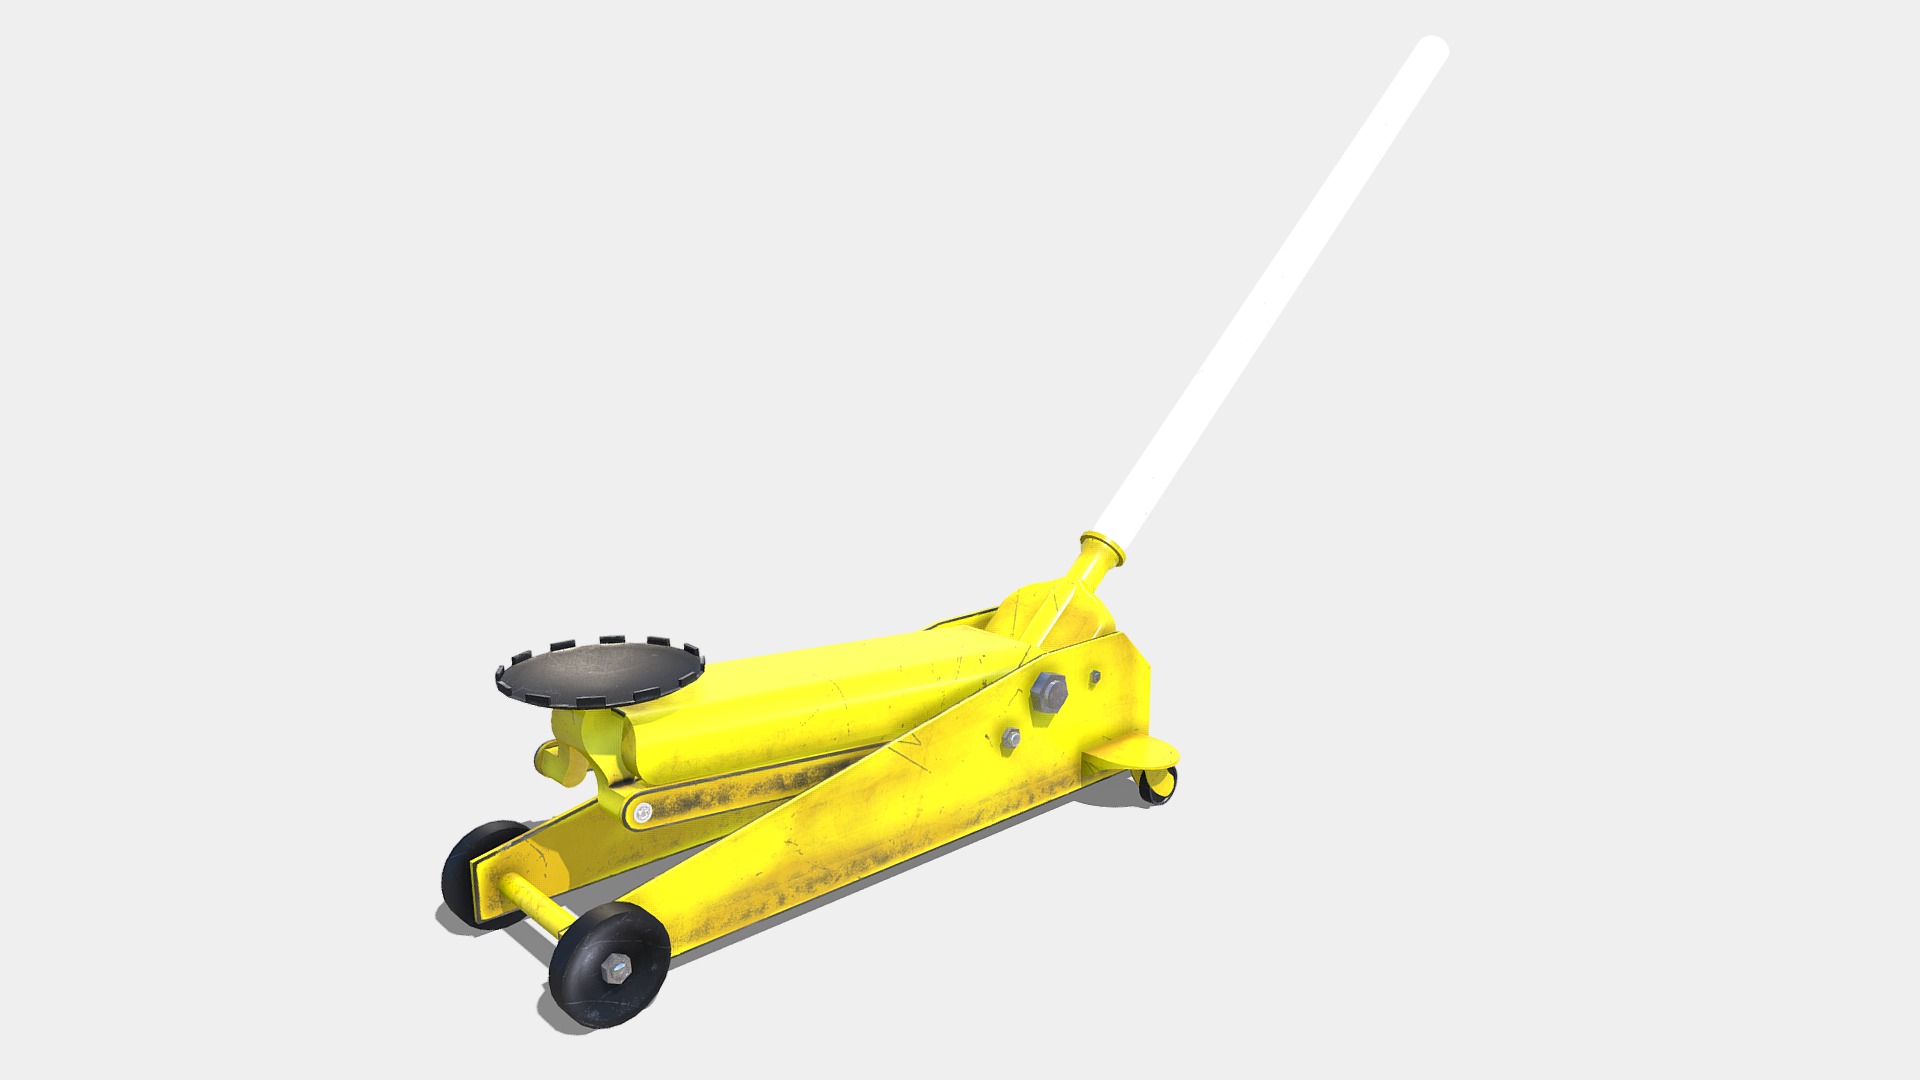 3D model Car Jack - This is a 3D model of the Car Jack. The 3D model is about a yellow and black toy.